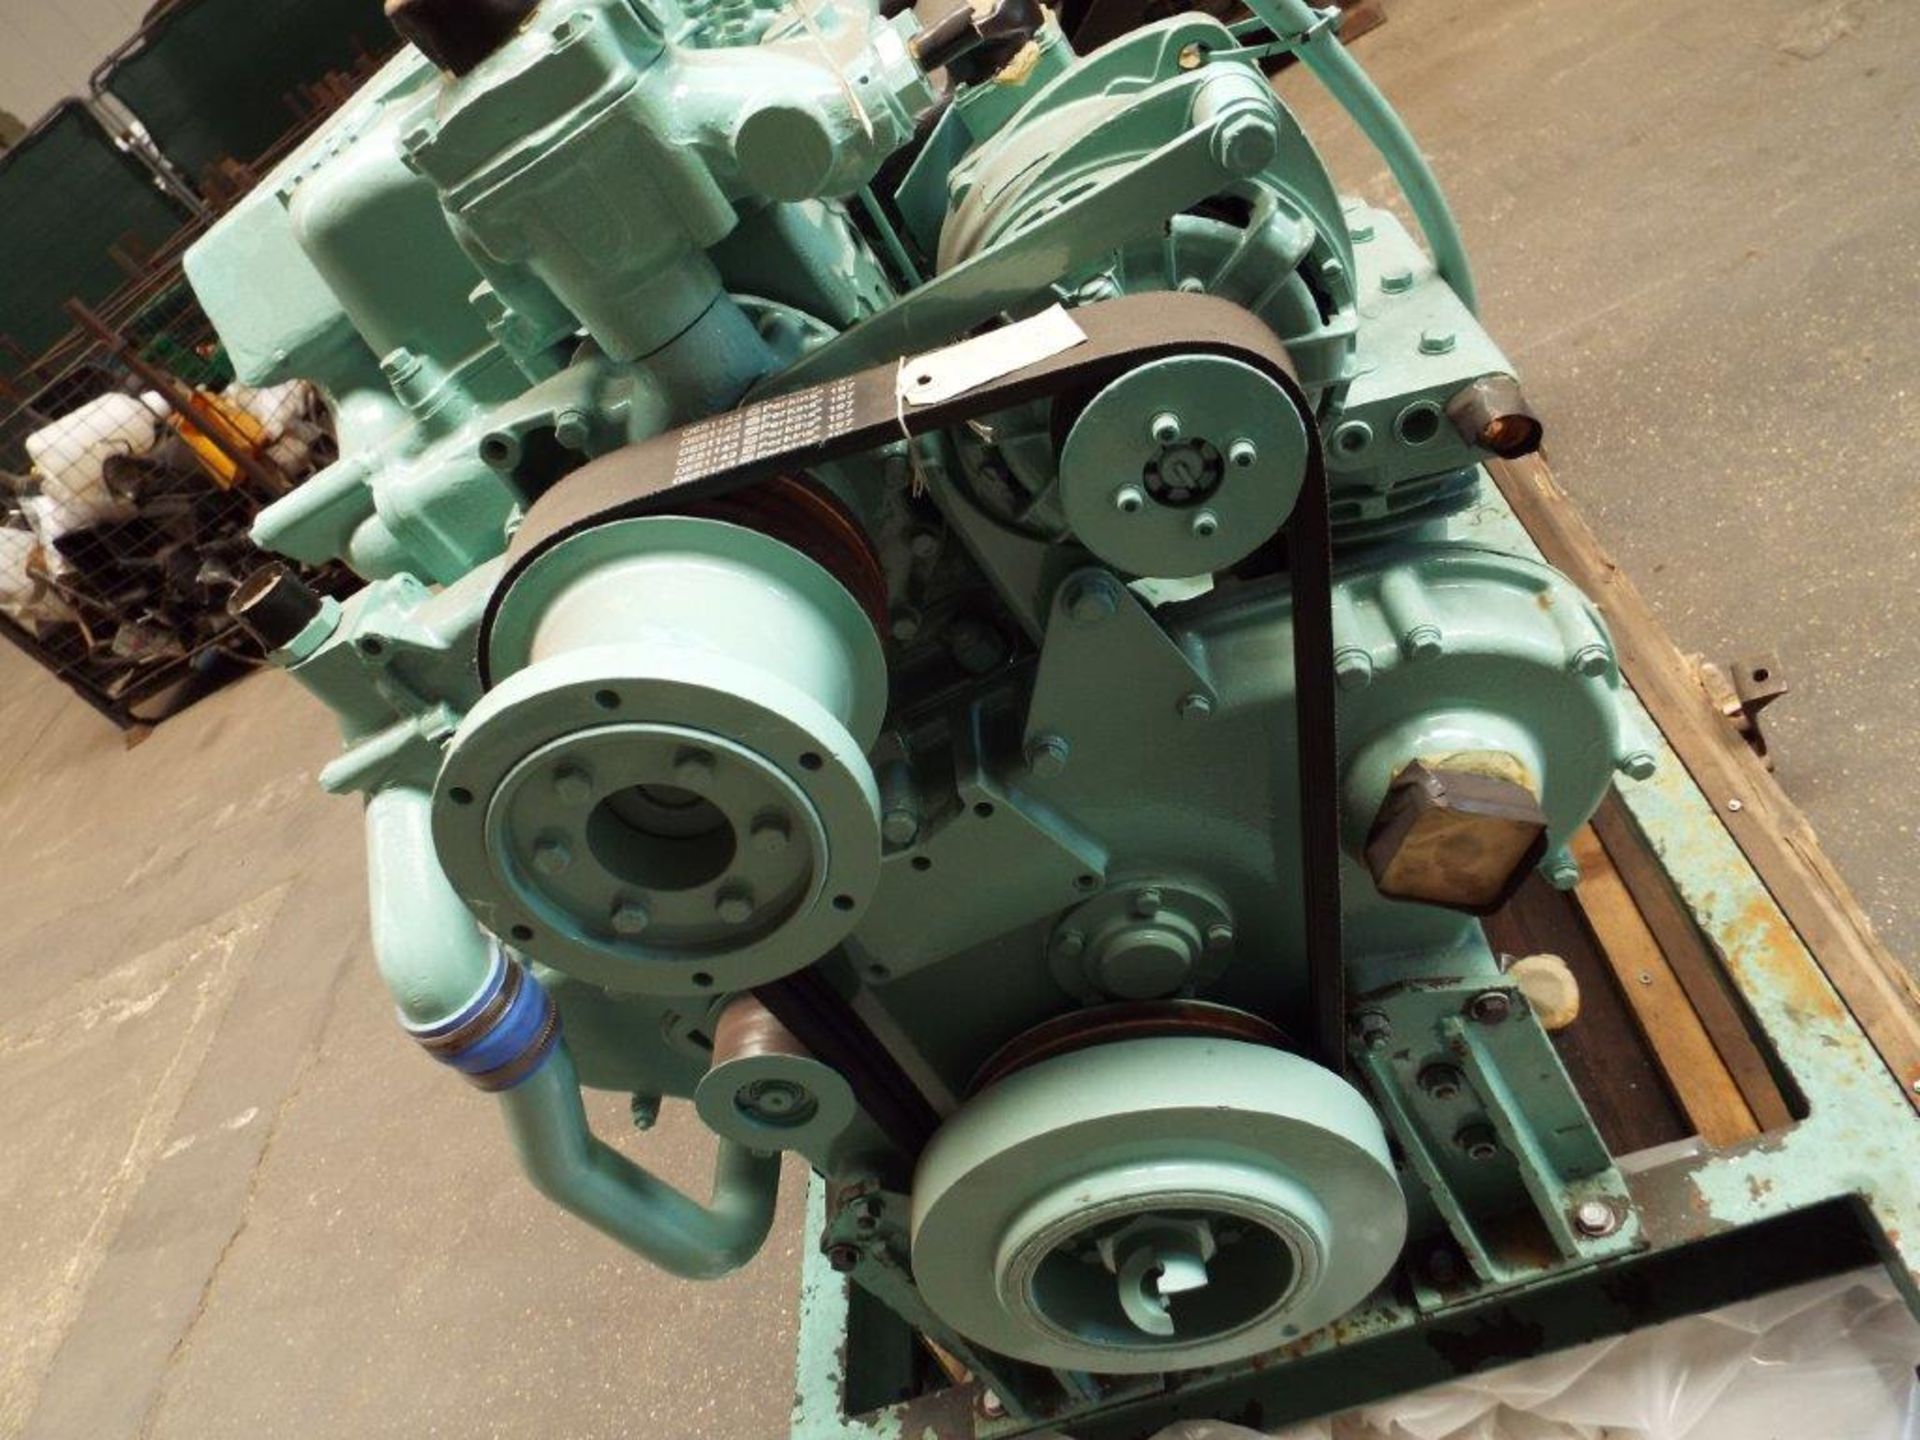 A1 Reconditioned Rolls Royce/Perkins 290L Straight 6 Turbo Diesel Engine for Foden Recovery Vehicles - Image 11 of 20